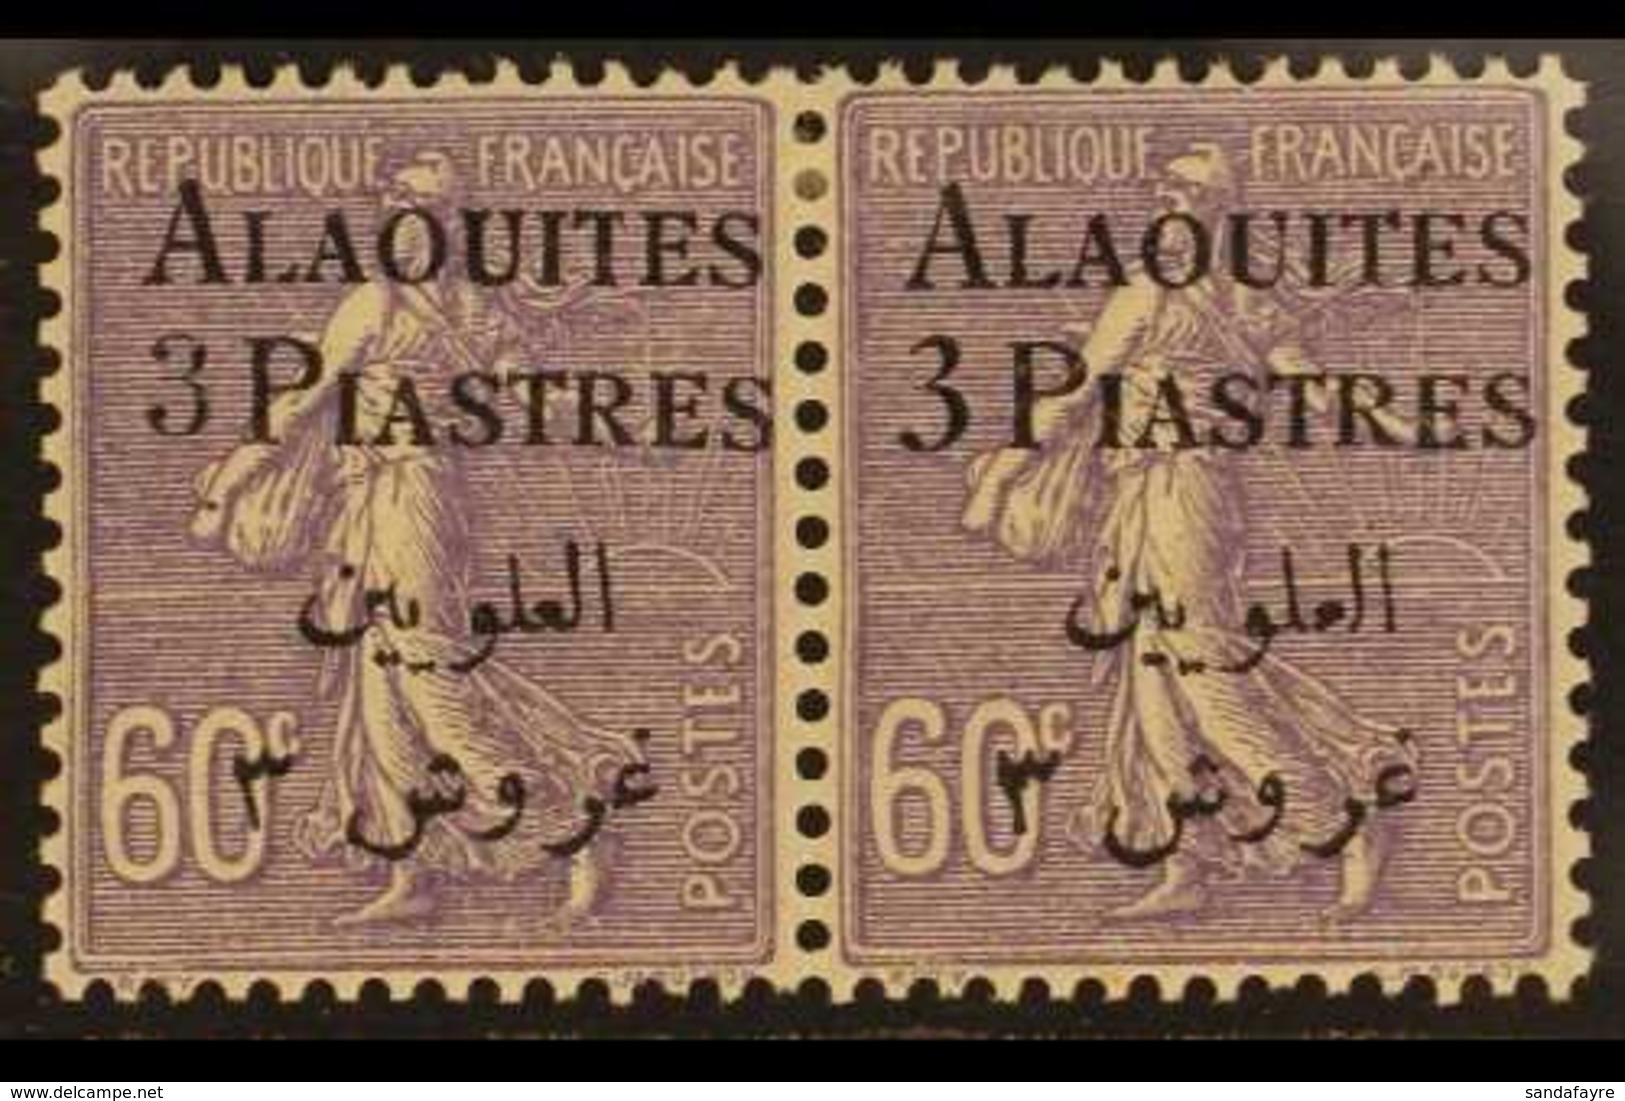 ALAOUITES 1925 3pi On 60c Violet, Horizontal Pair Types I & II, Yv 11/11b, Very Fine Mint. For More Images, Please Visit - Syrie